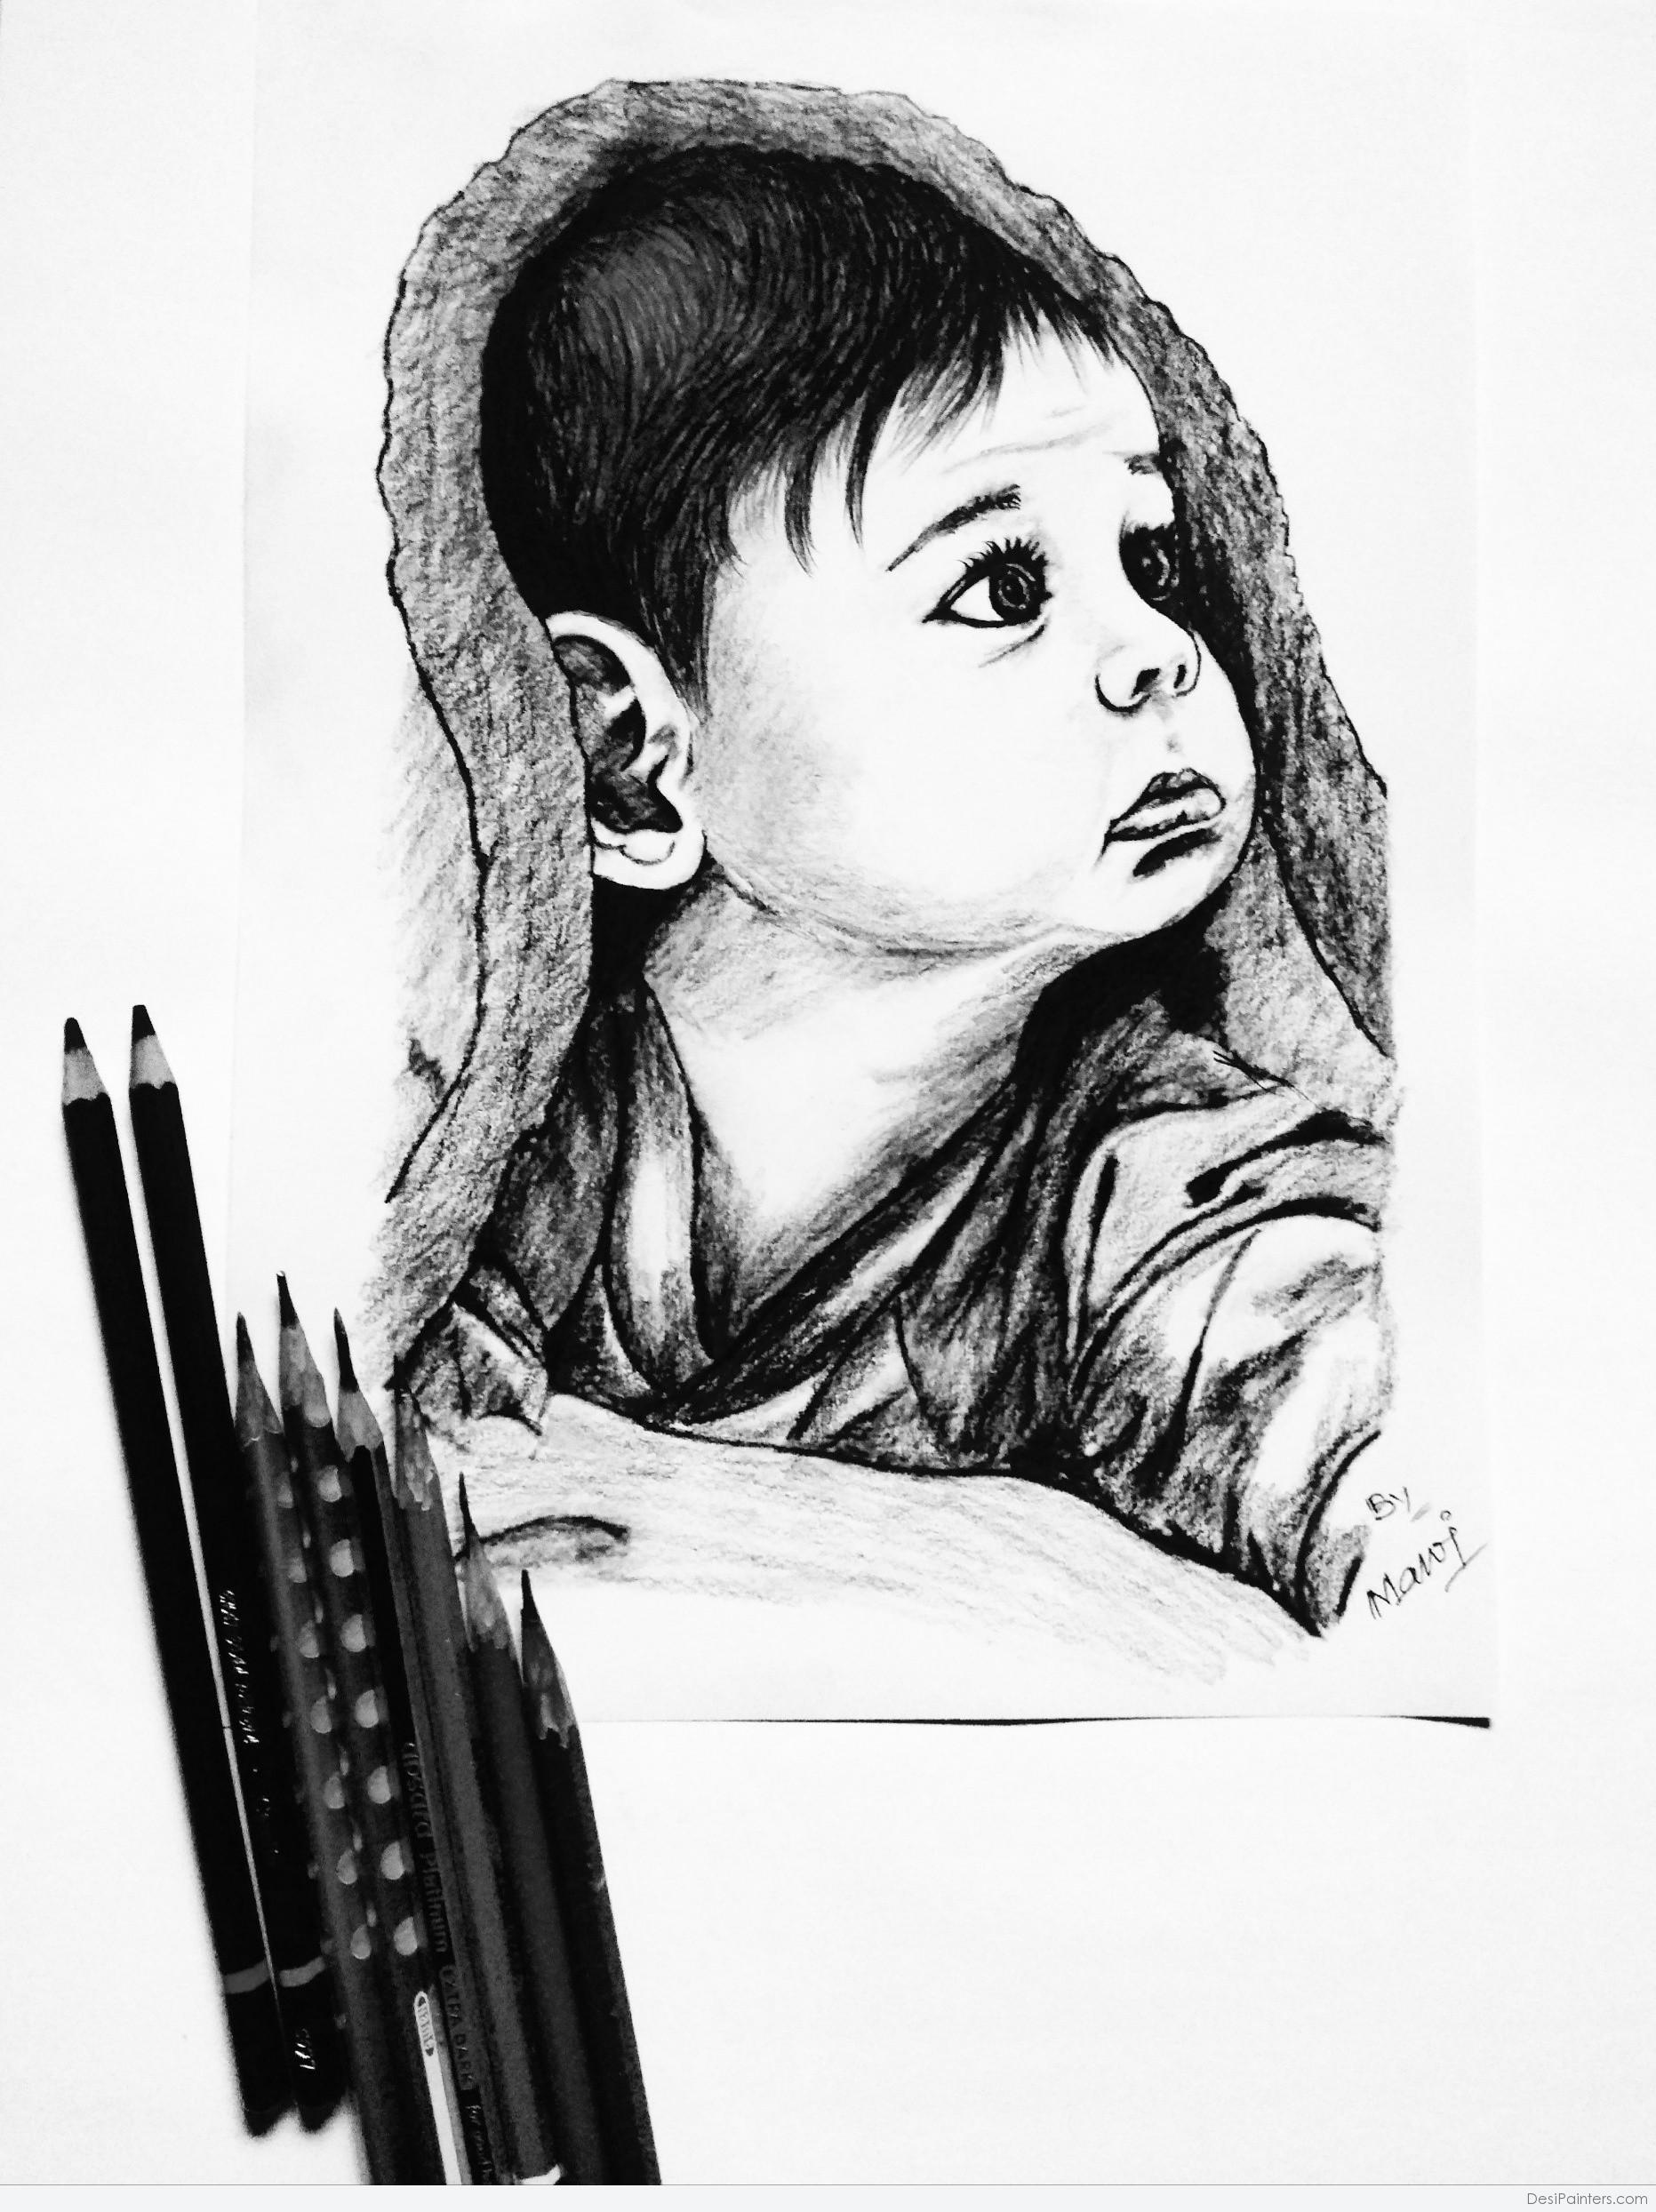 Pencil drawing of baby stock illustration. Illustration of baby - 53150706